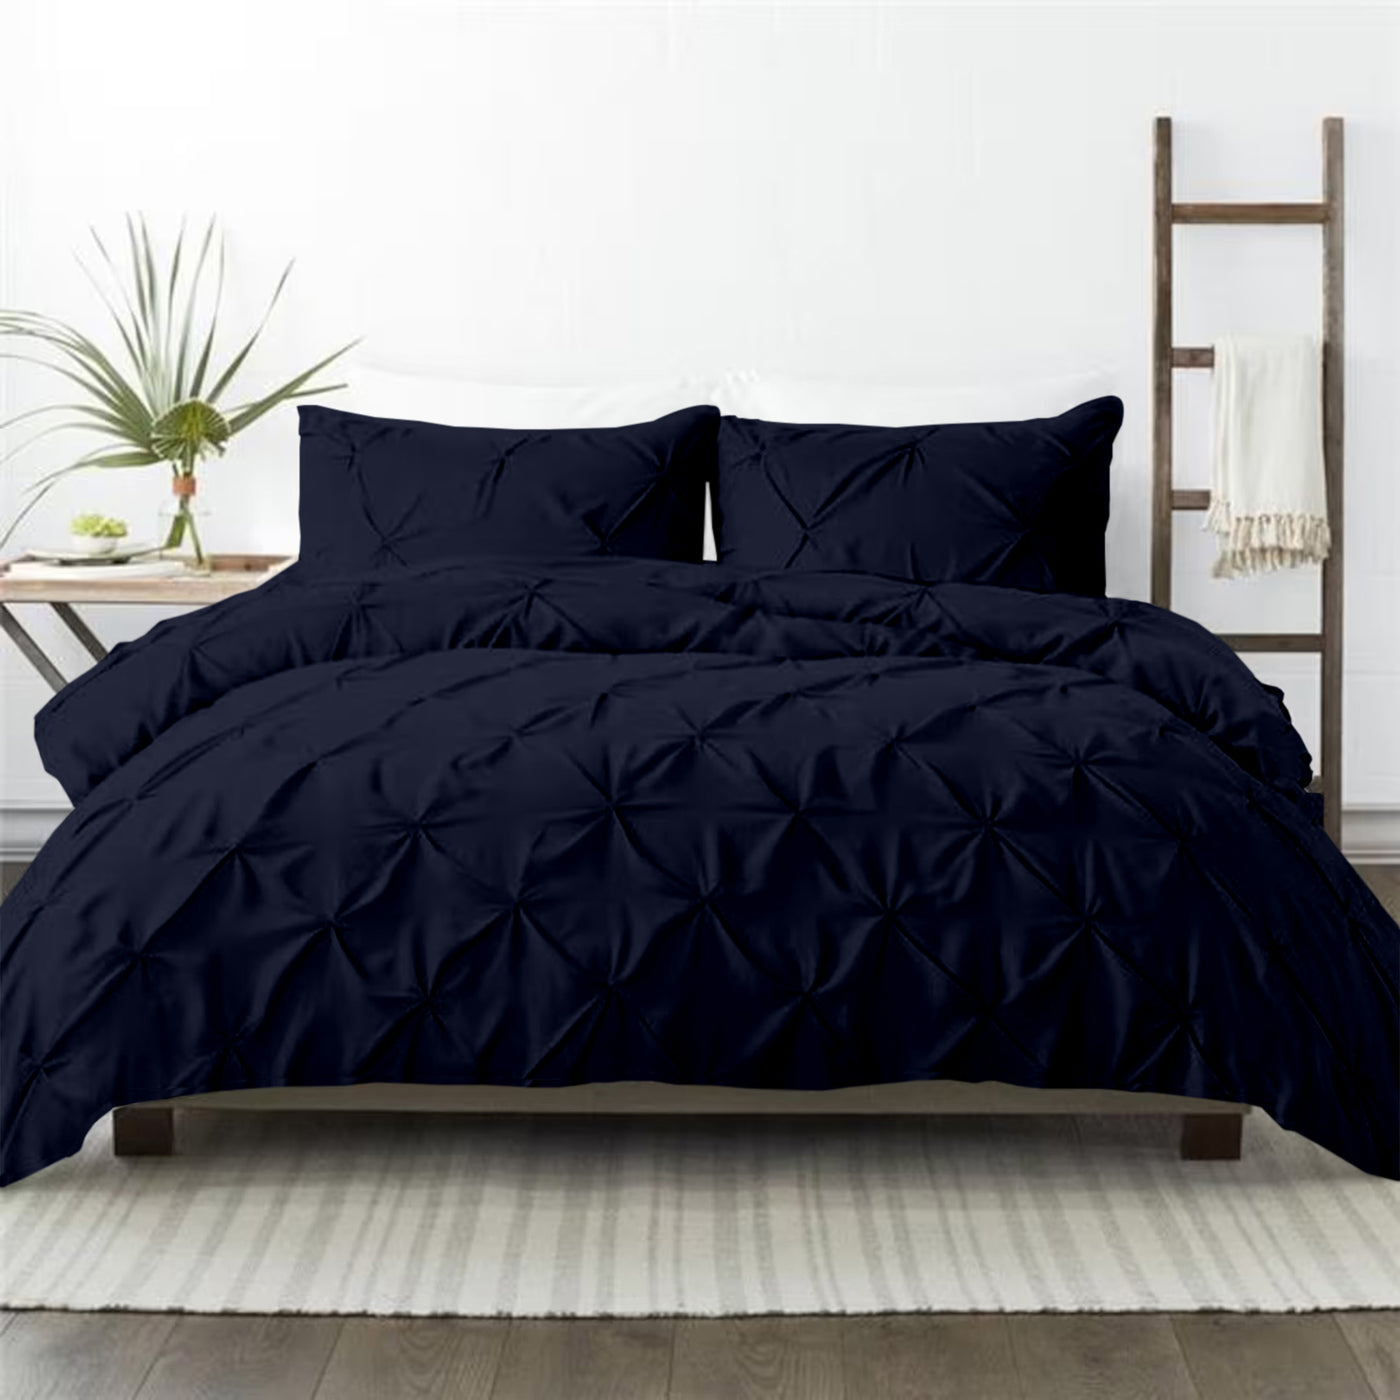 Pinch Pleated 300 TC Egyptian Cotton Duvet Cover Set - Navy Blue